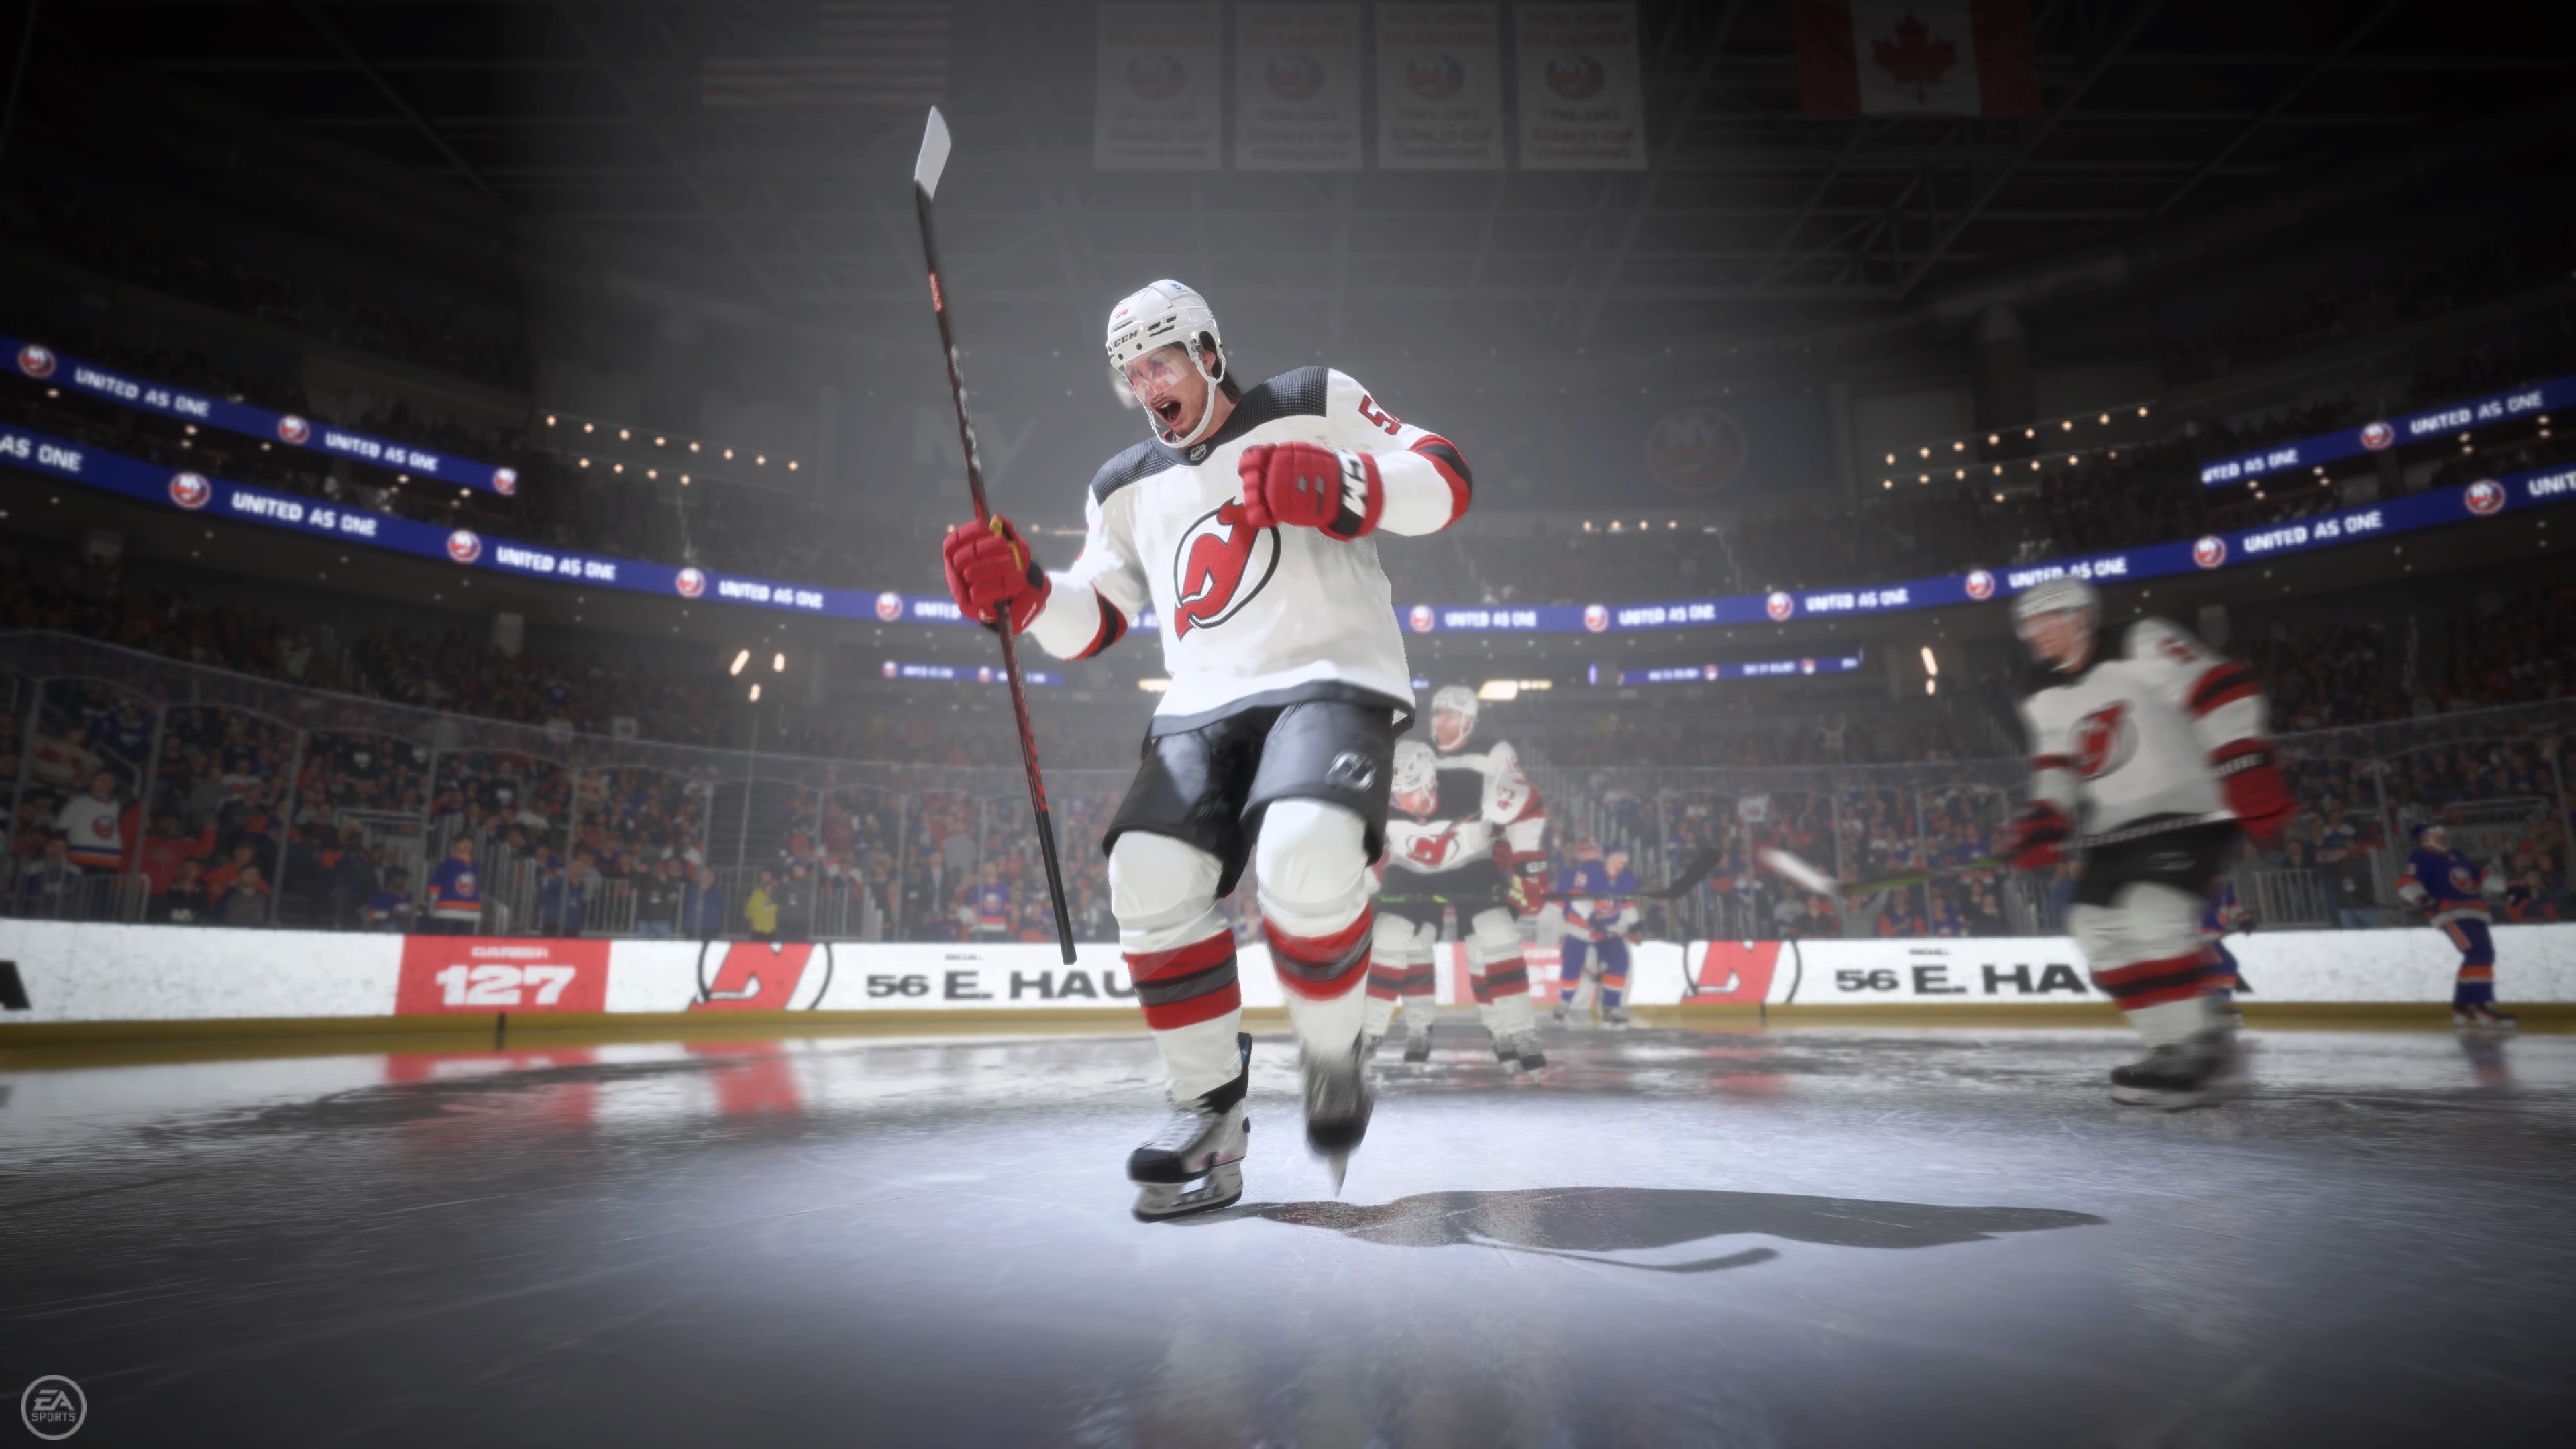 10 HUT Uniforms to Consider Wearing in NHL 22 - Operation Sports